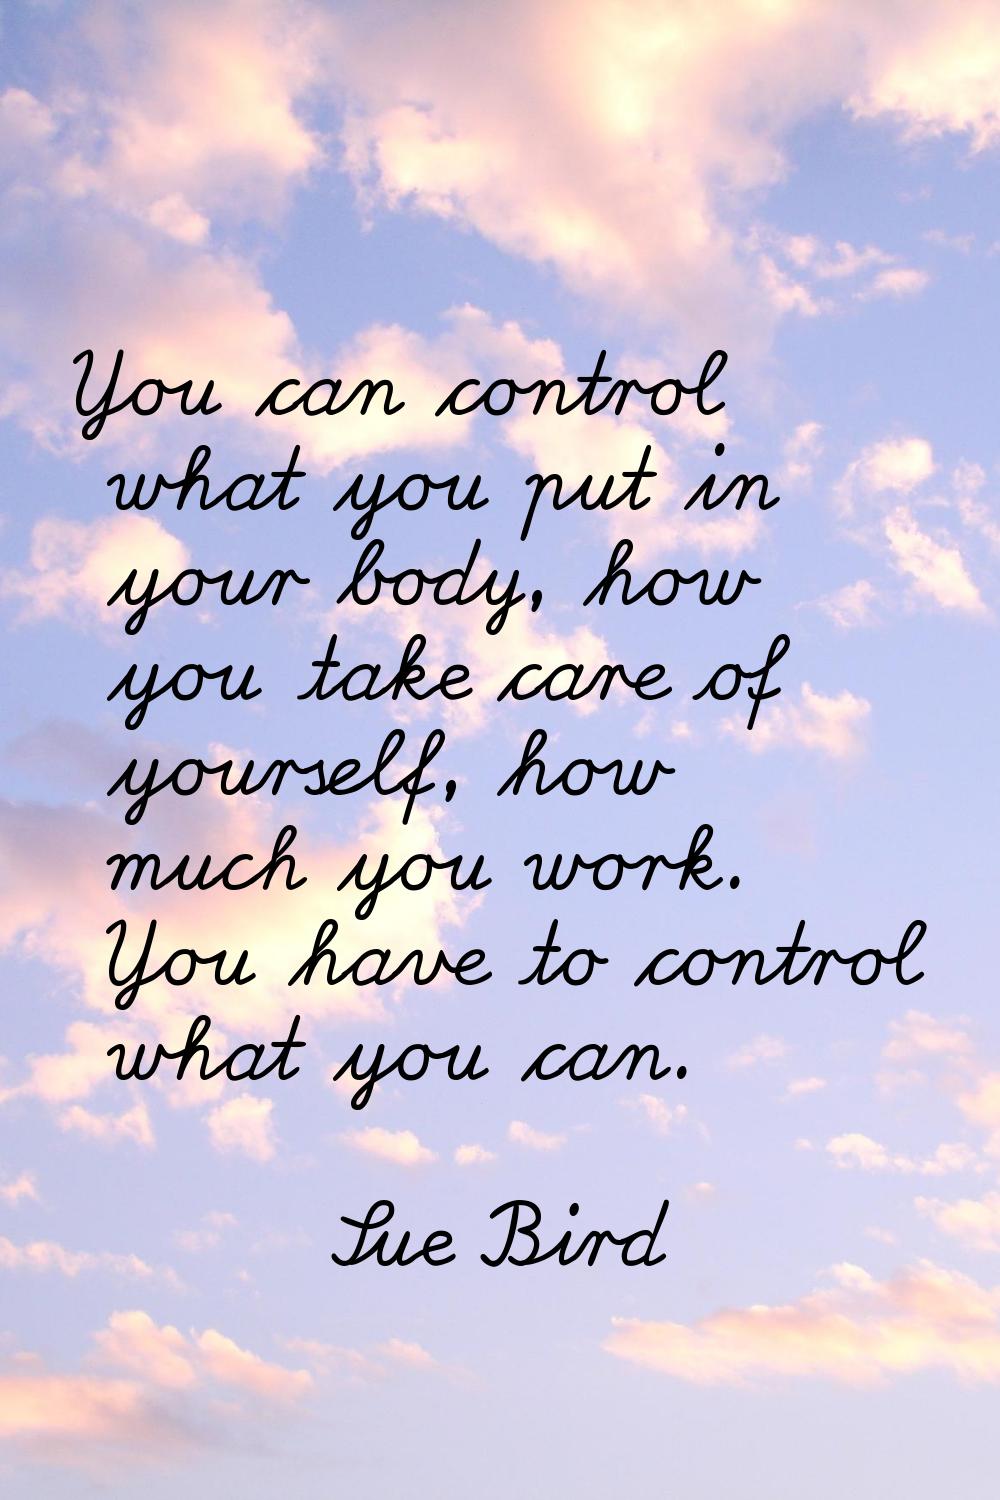 You can control what you put in your body, how you take care of yourself, how much you work. You ha